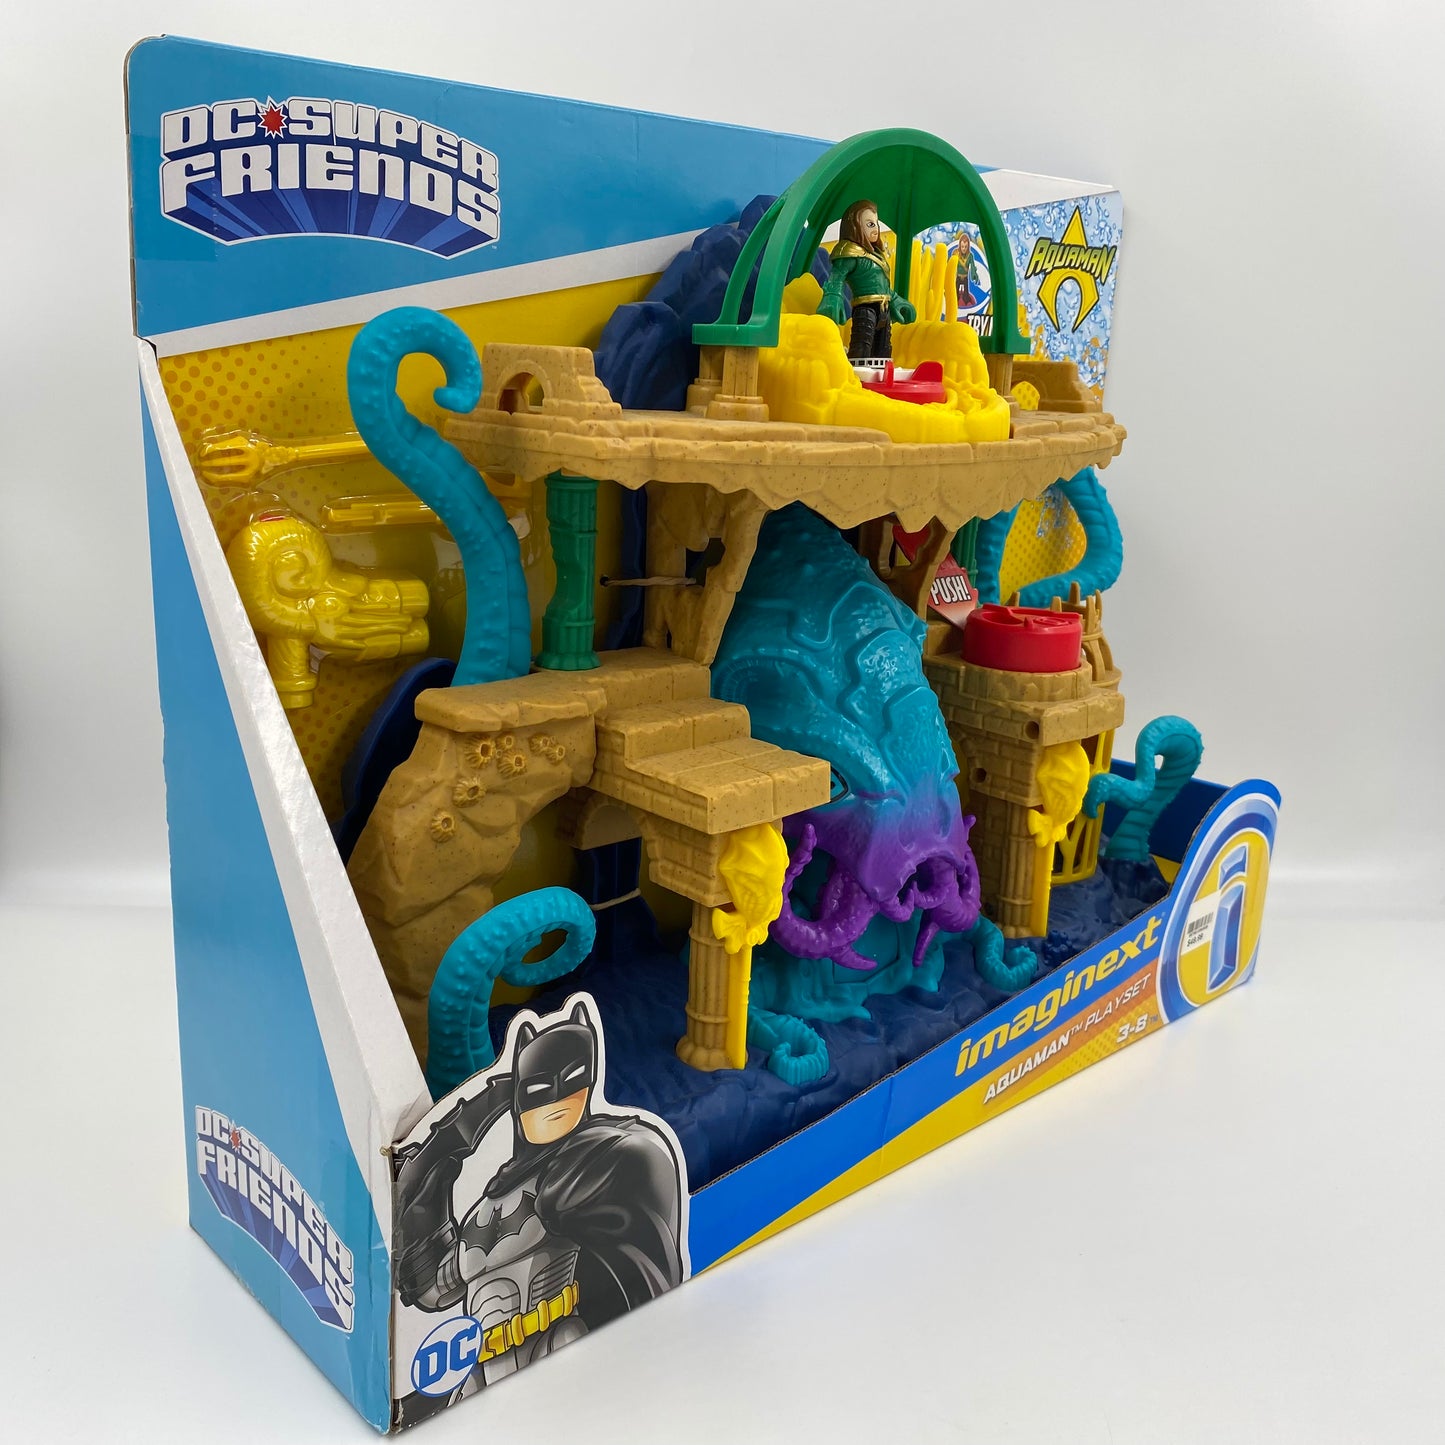 Imaginext DC Super Friends Aquaman boxed playset (2018) Fisher Price